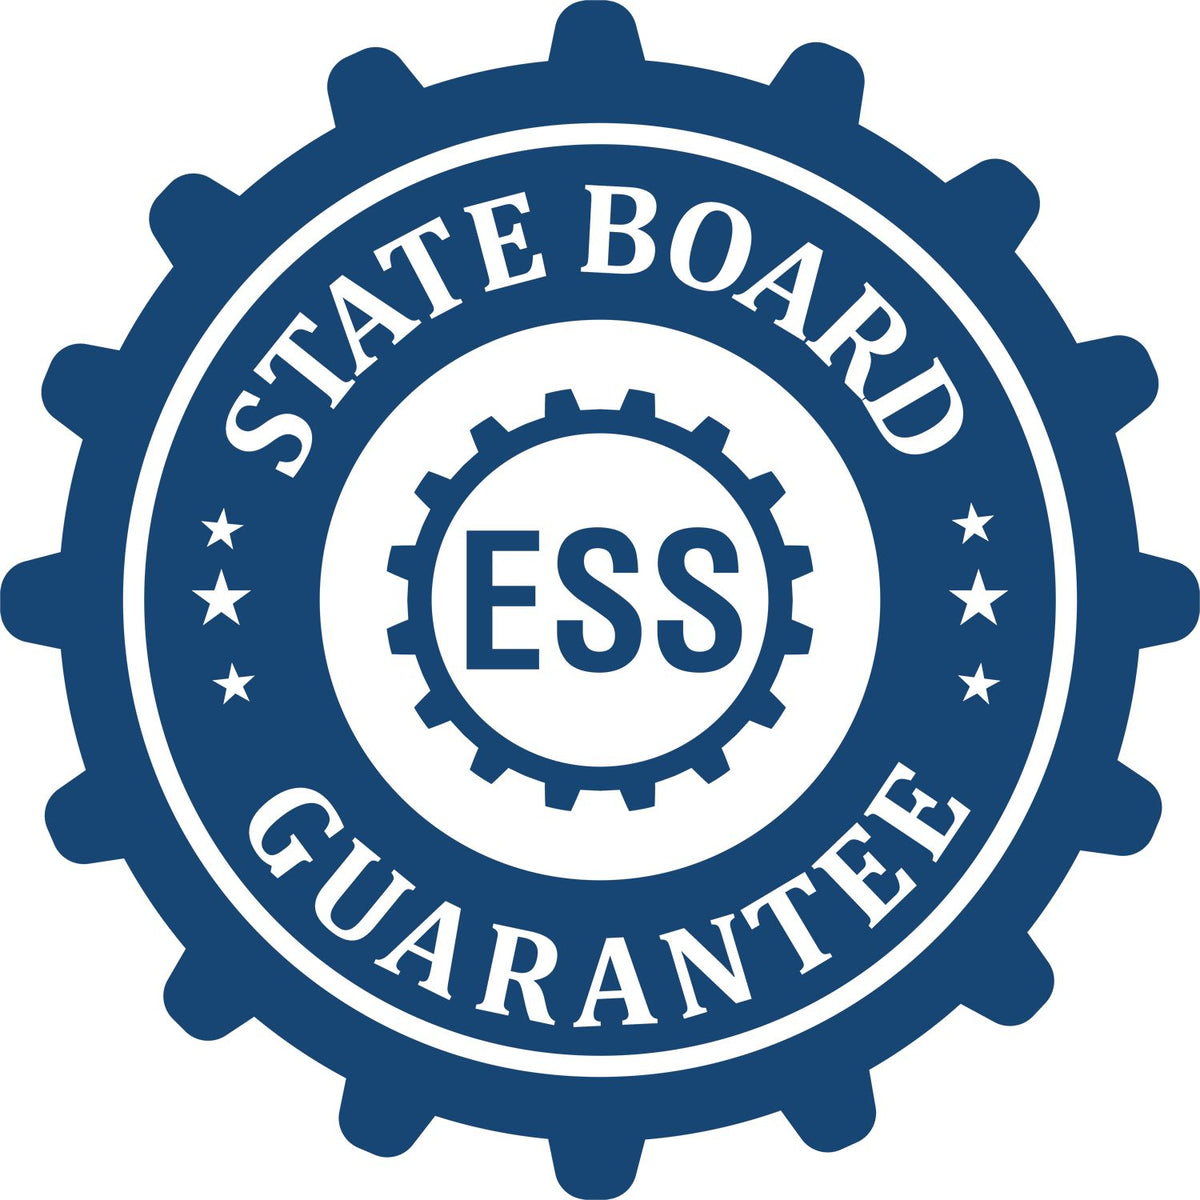 An emblem in a gear shape illustrating a state board guarantee for the Gift Maryland Land Surveyor Seal